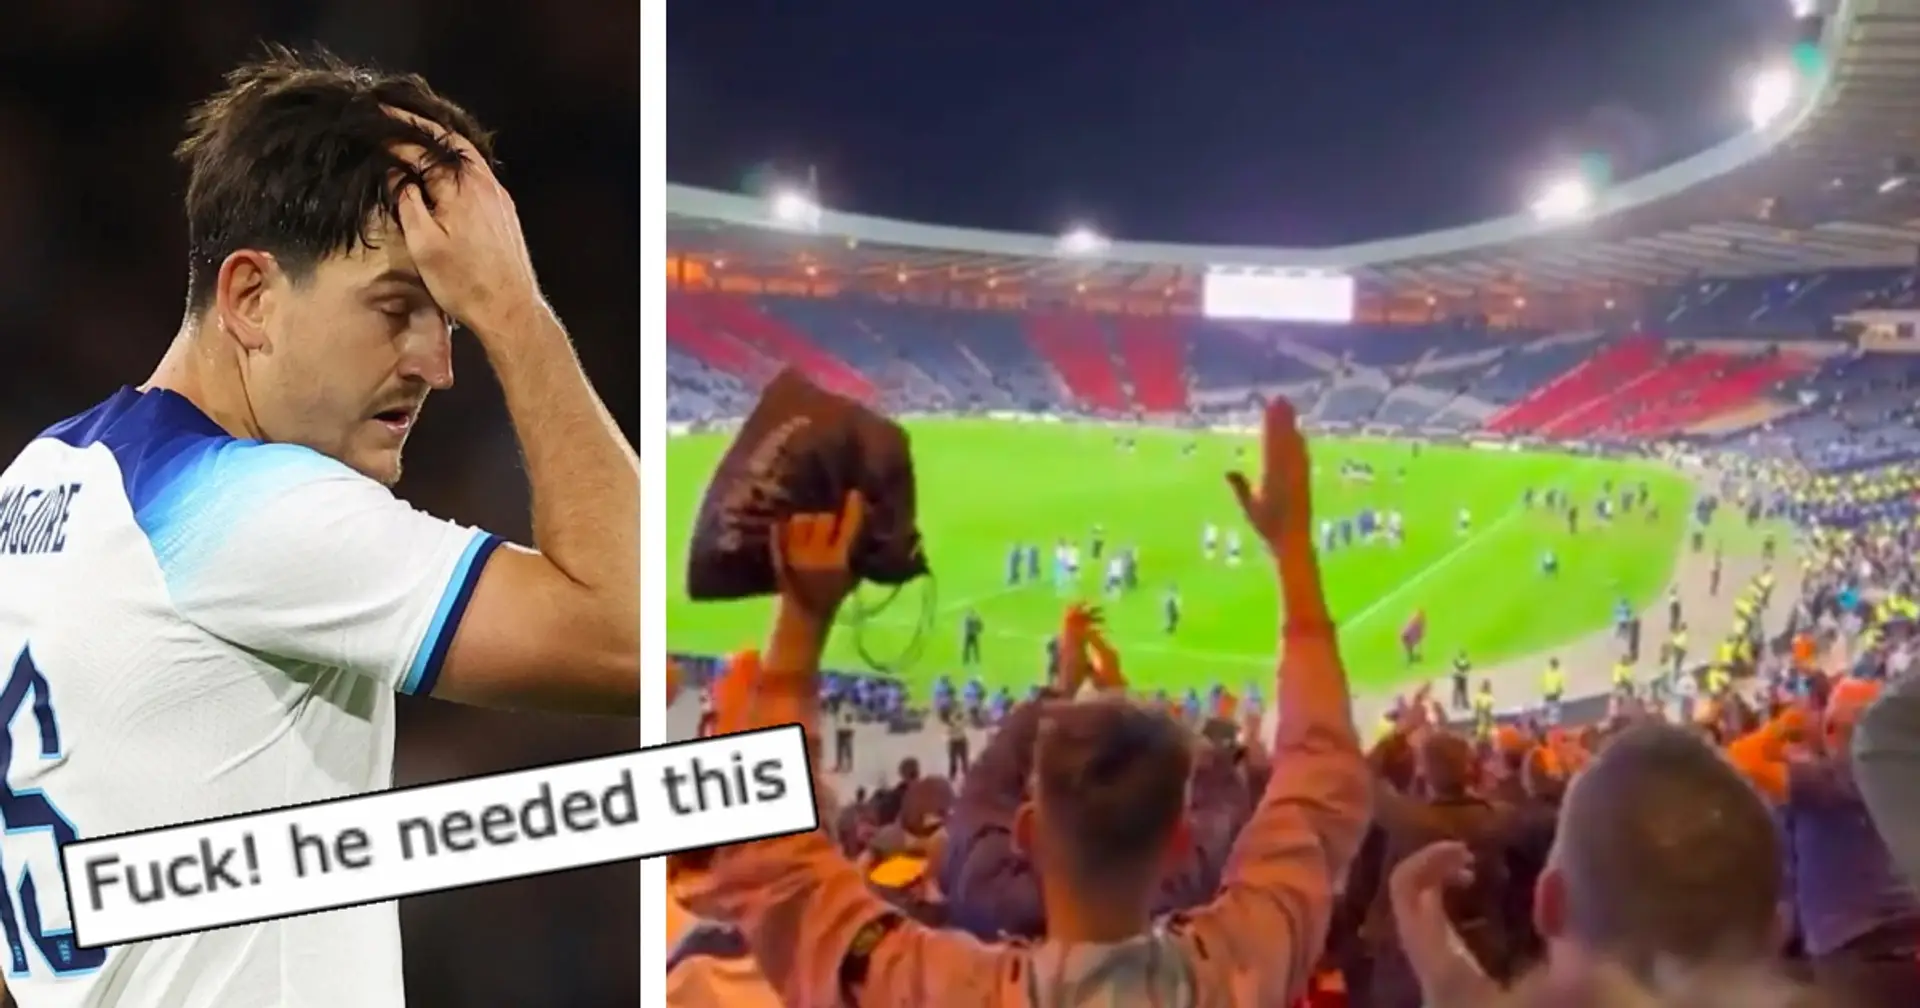 SPOTTED: Fans compose lovely chant for Maguire in rare show of support for Man United defender 